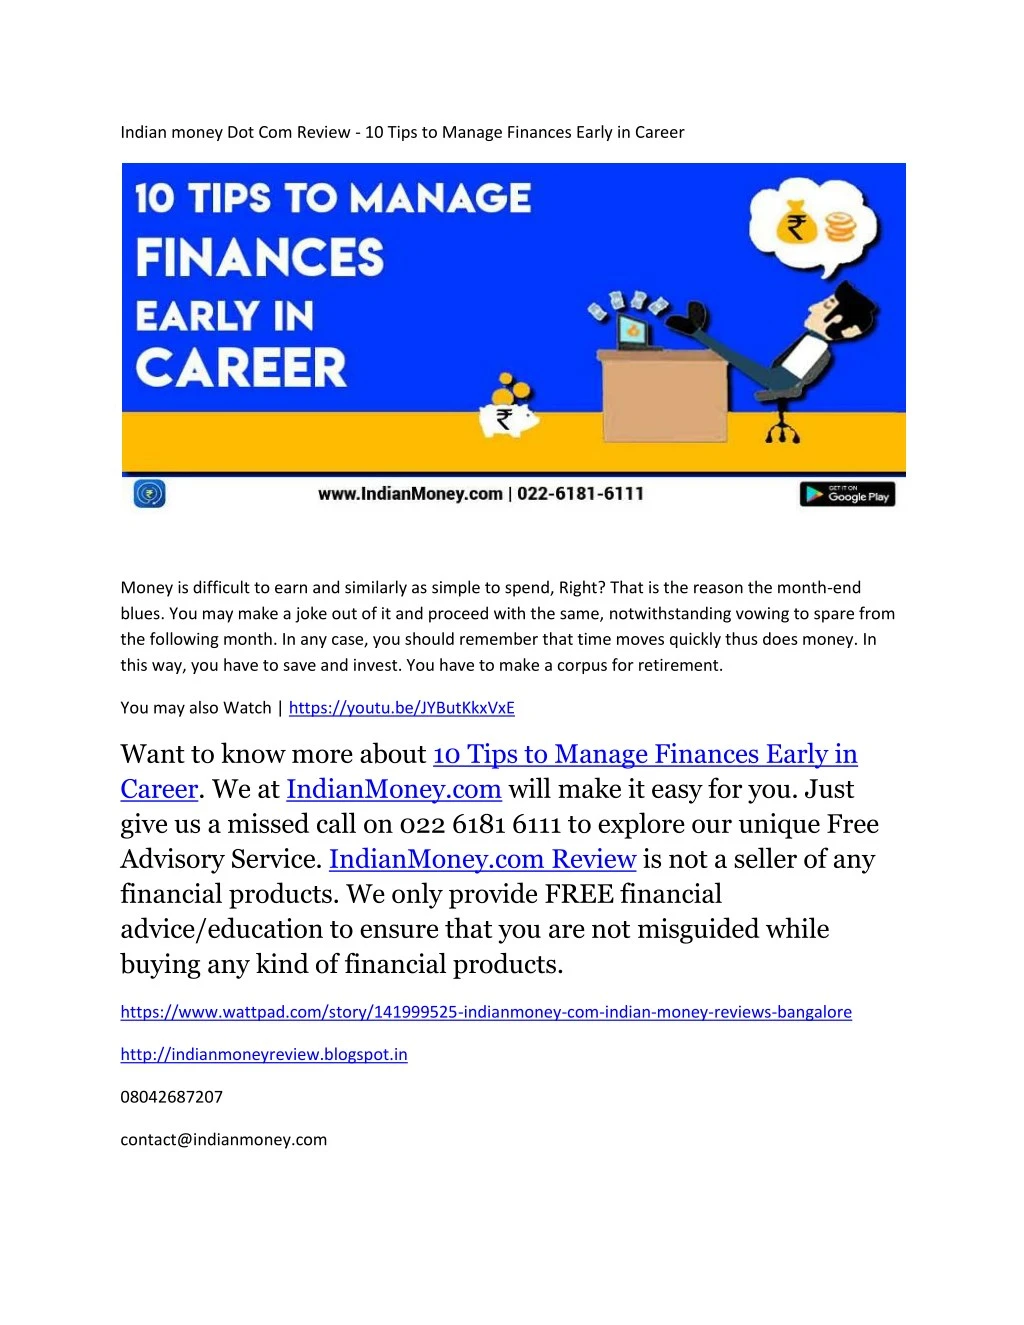 indian money dot com review 10 tips to manage